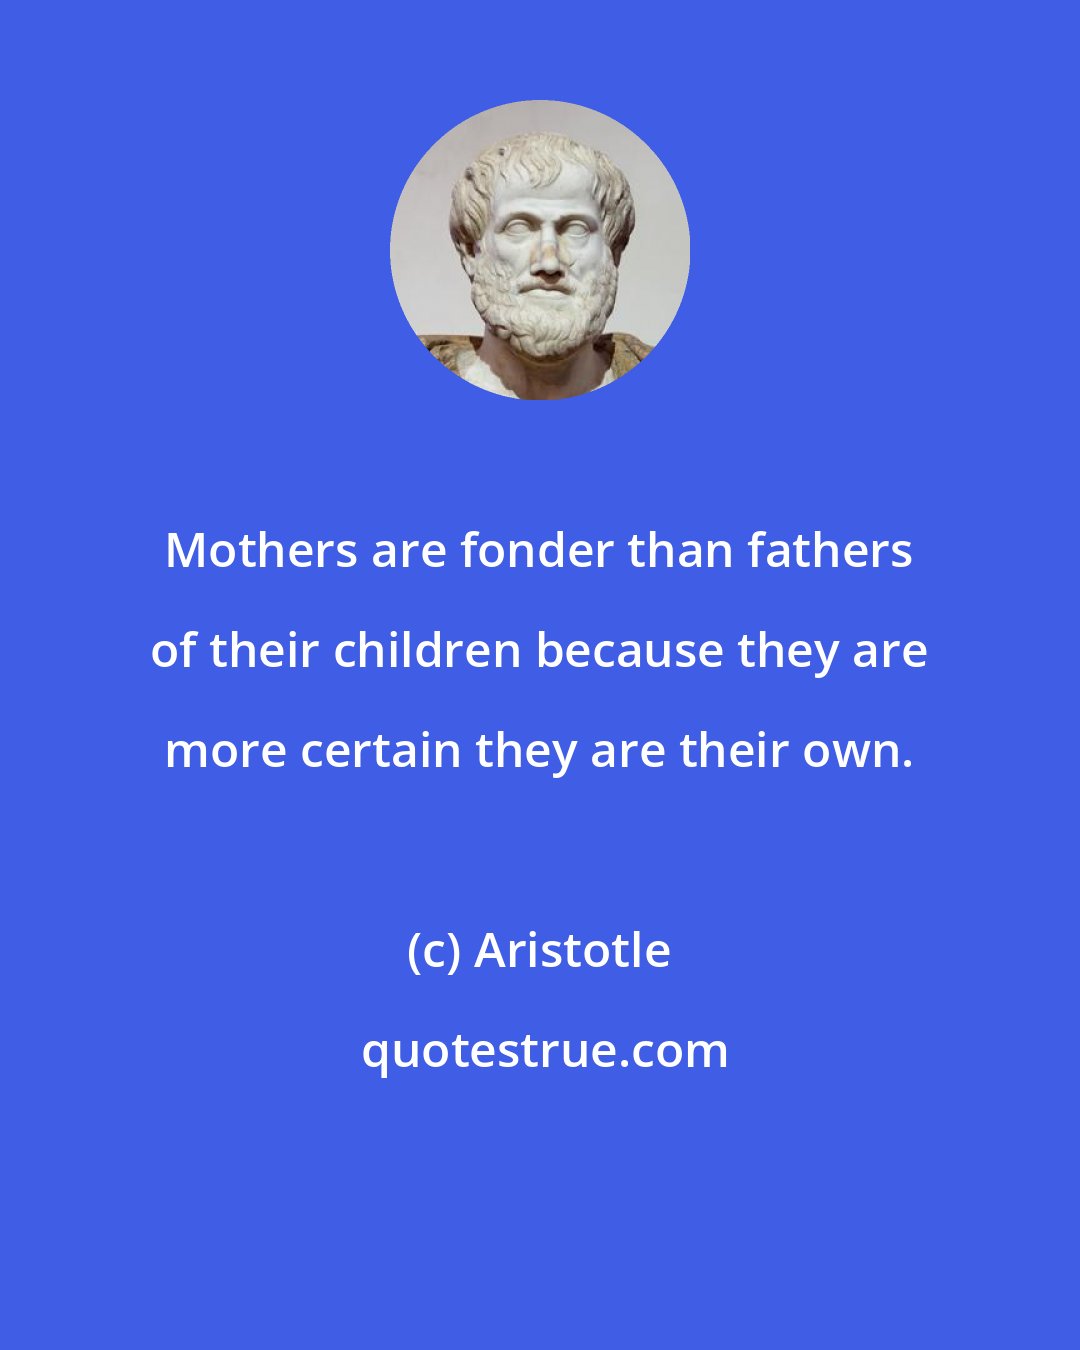 Aristotle: Mothers are fonder than fathers of their children because they are more certain they are their own.